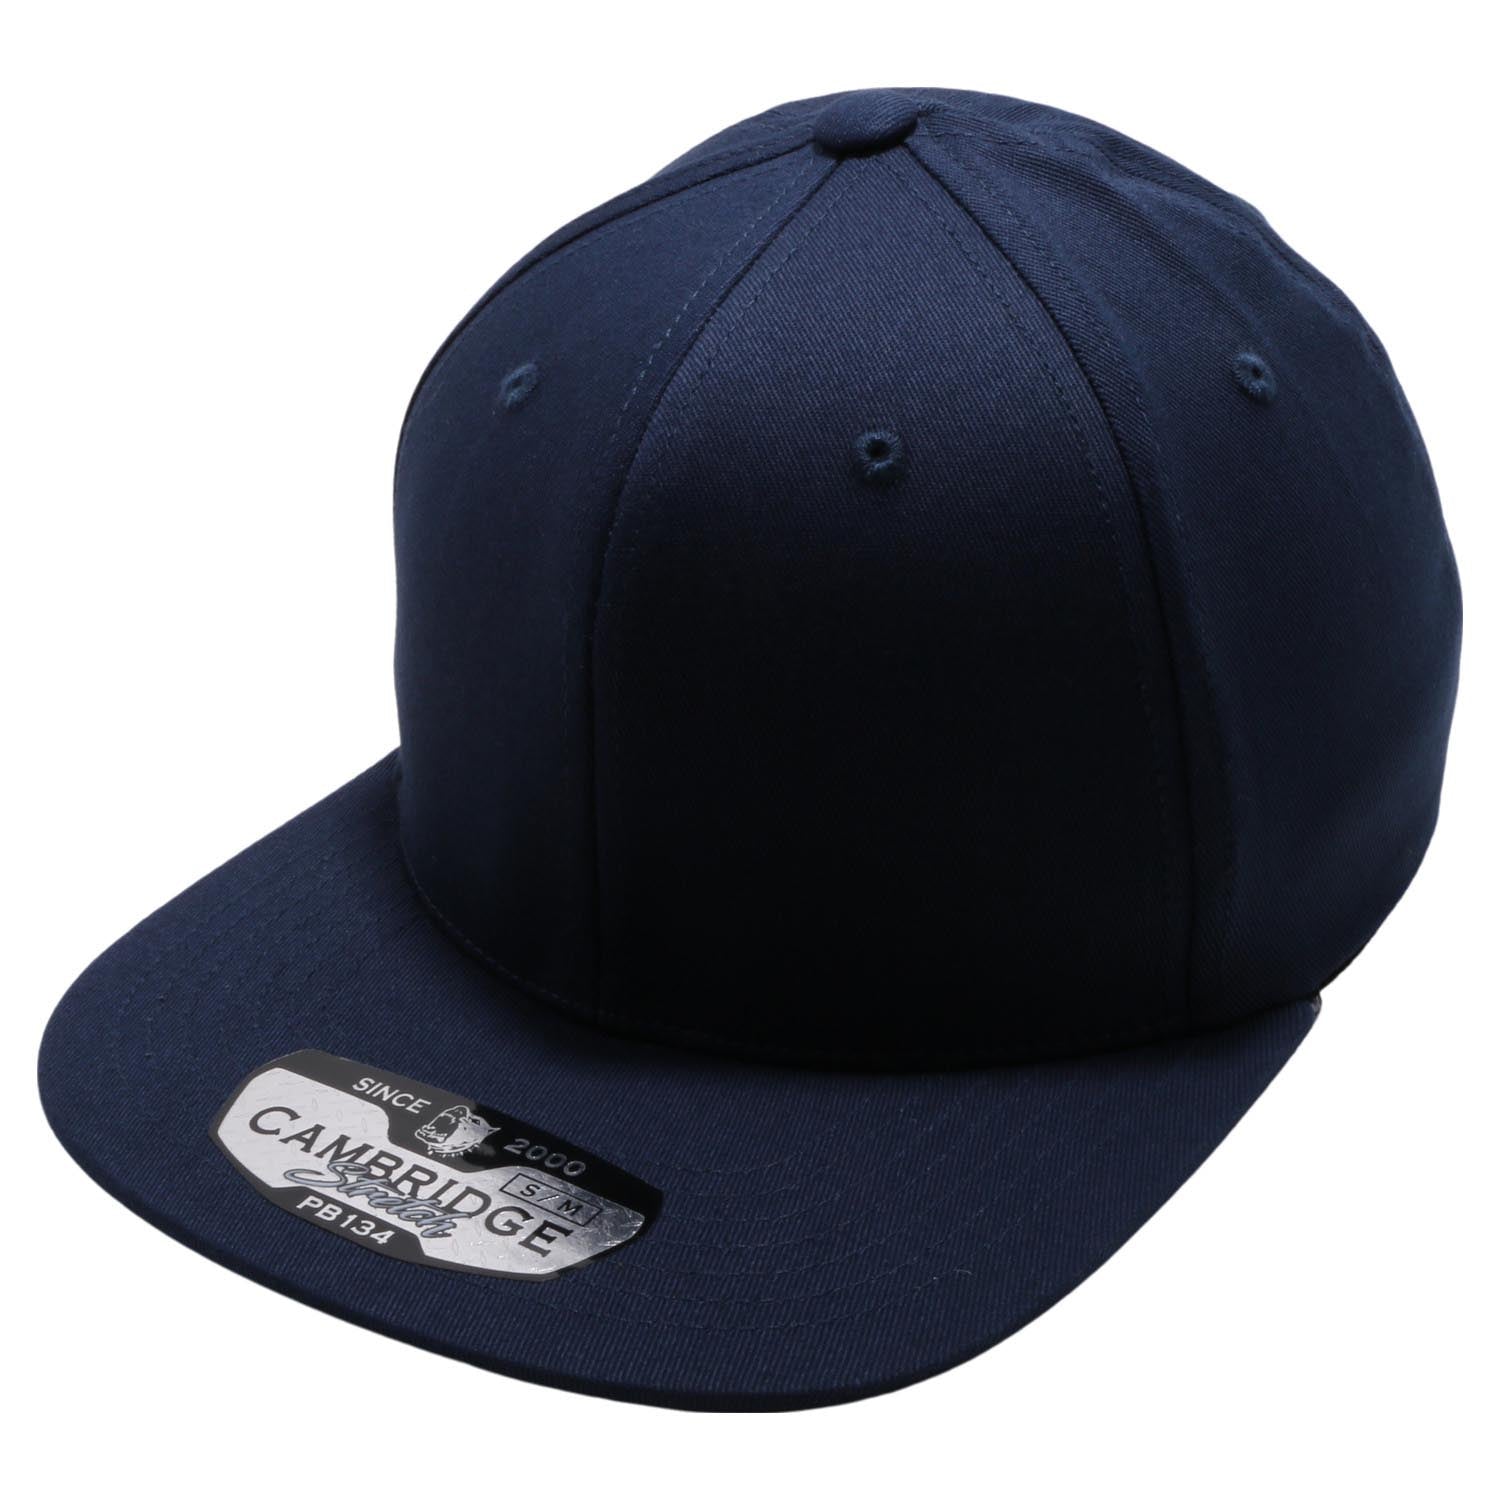 PB134 Pit Bull Comfort Fit Flat Fitted Hats [Navy] – CHOICE CAP, INC.